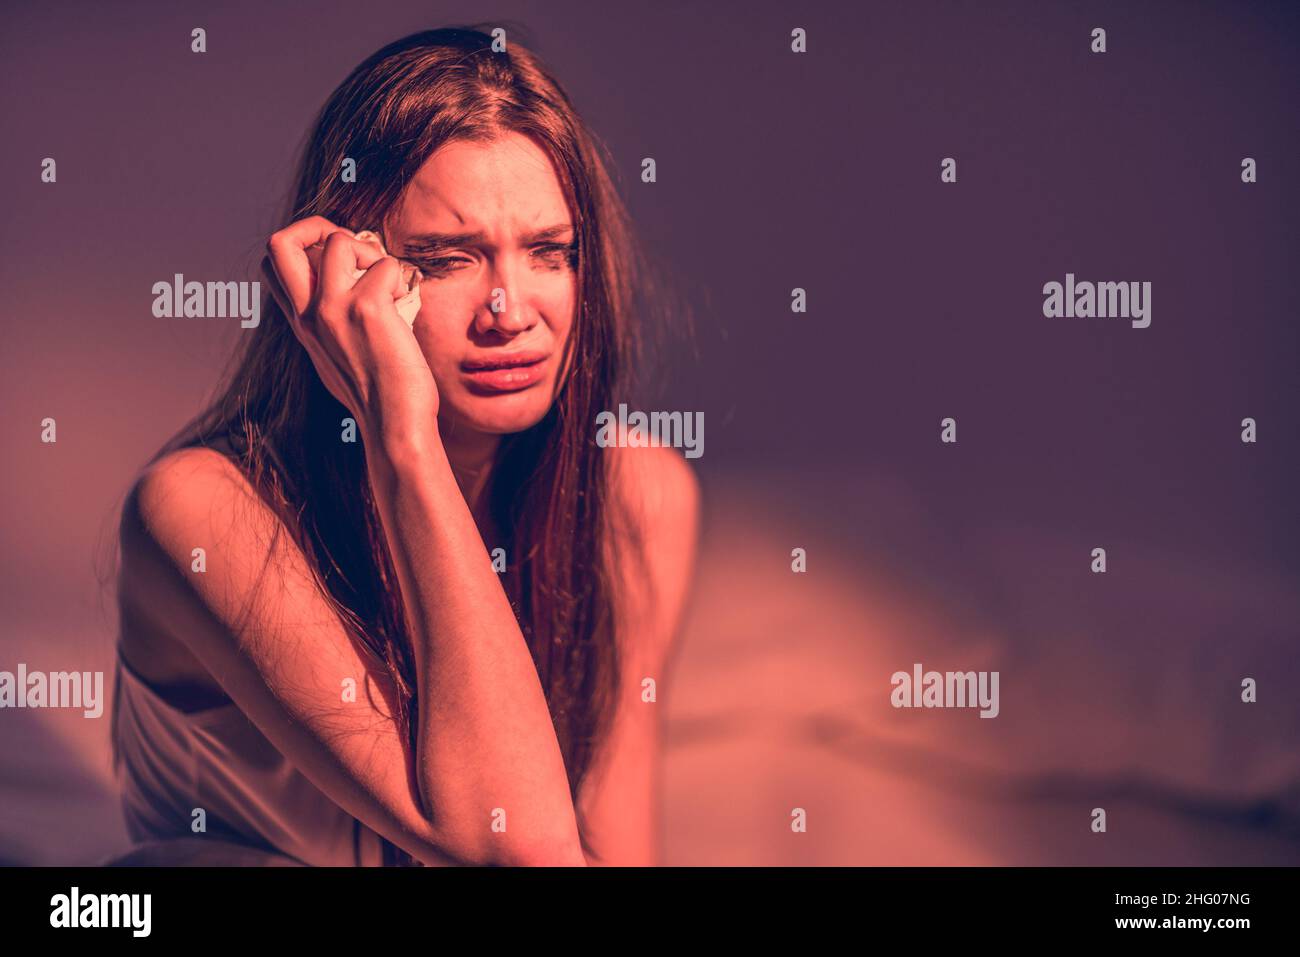 Get upset. Get the bad news. To suffer. Broken heart. Depression. A woman with a face dirty from mascara sits in bed, cries, wipes away her tears. Hea Stock Photo